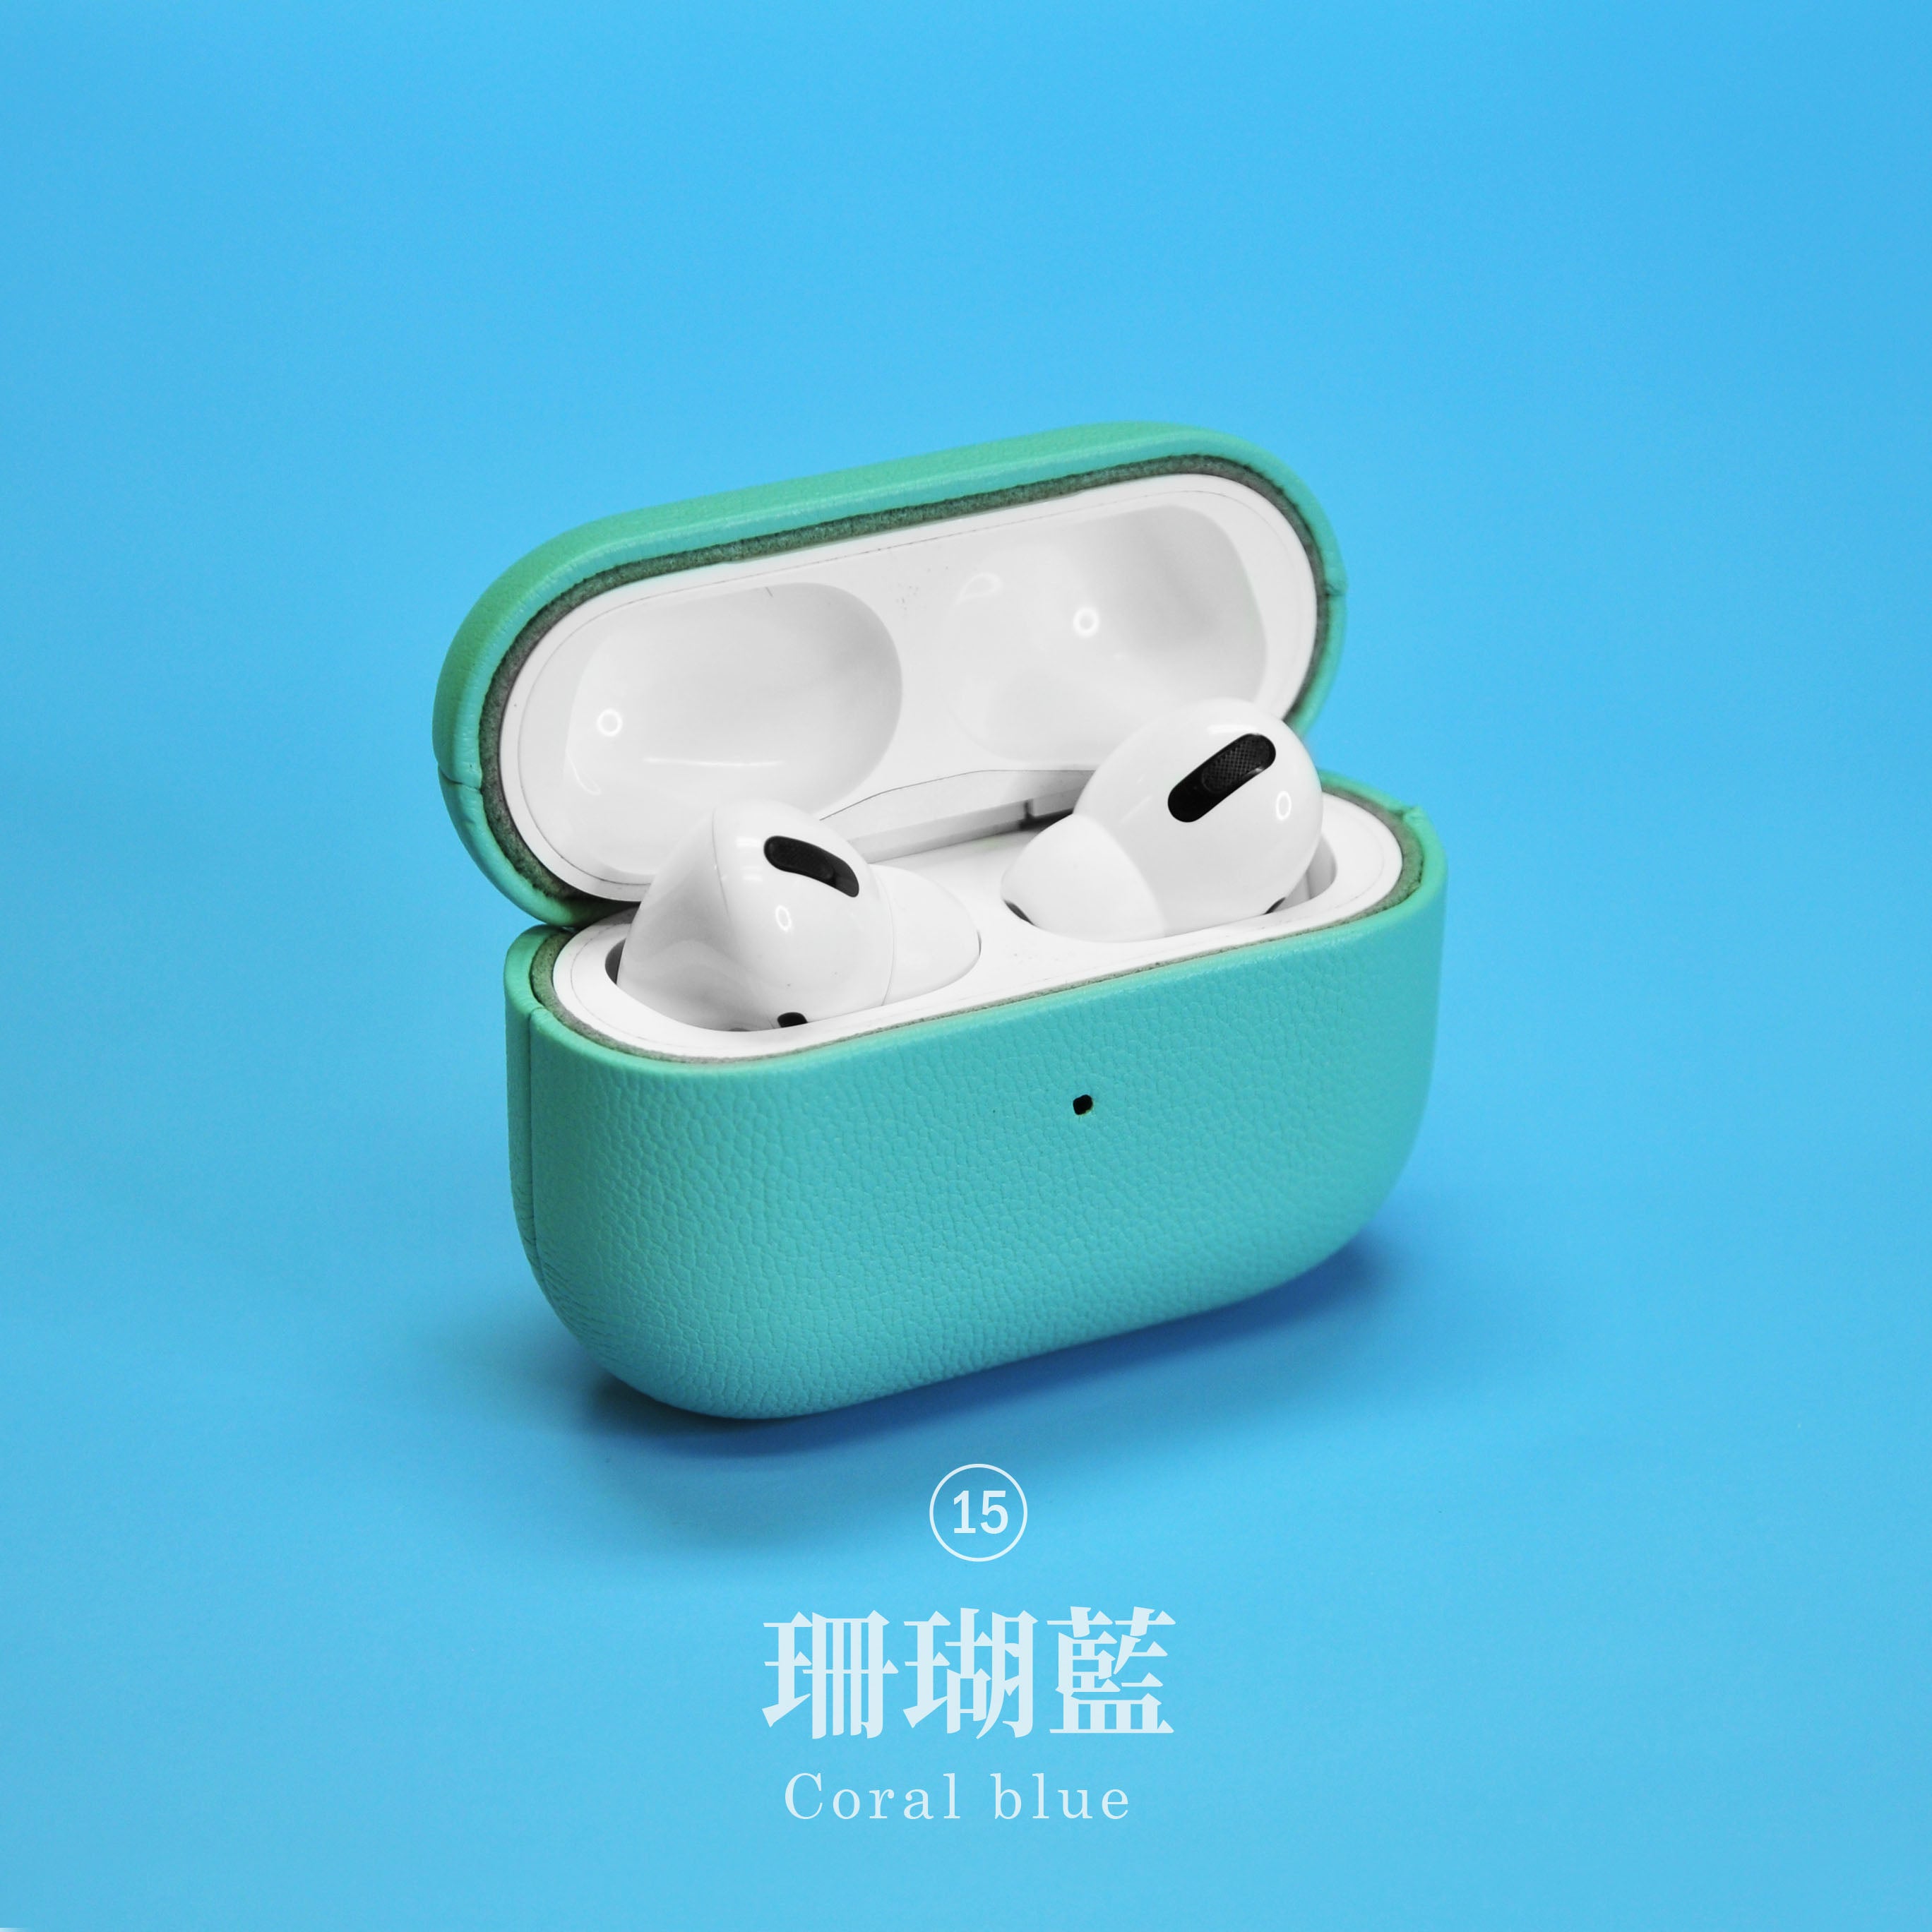 Leather AirPod Case (3rd Generation)- Teal Blue – Brandless